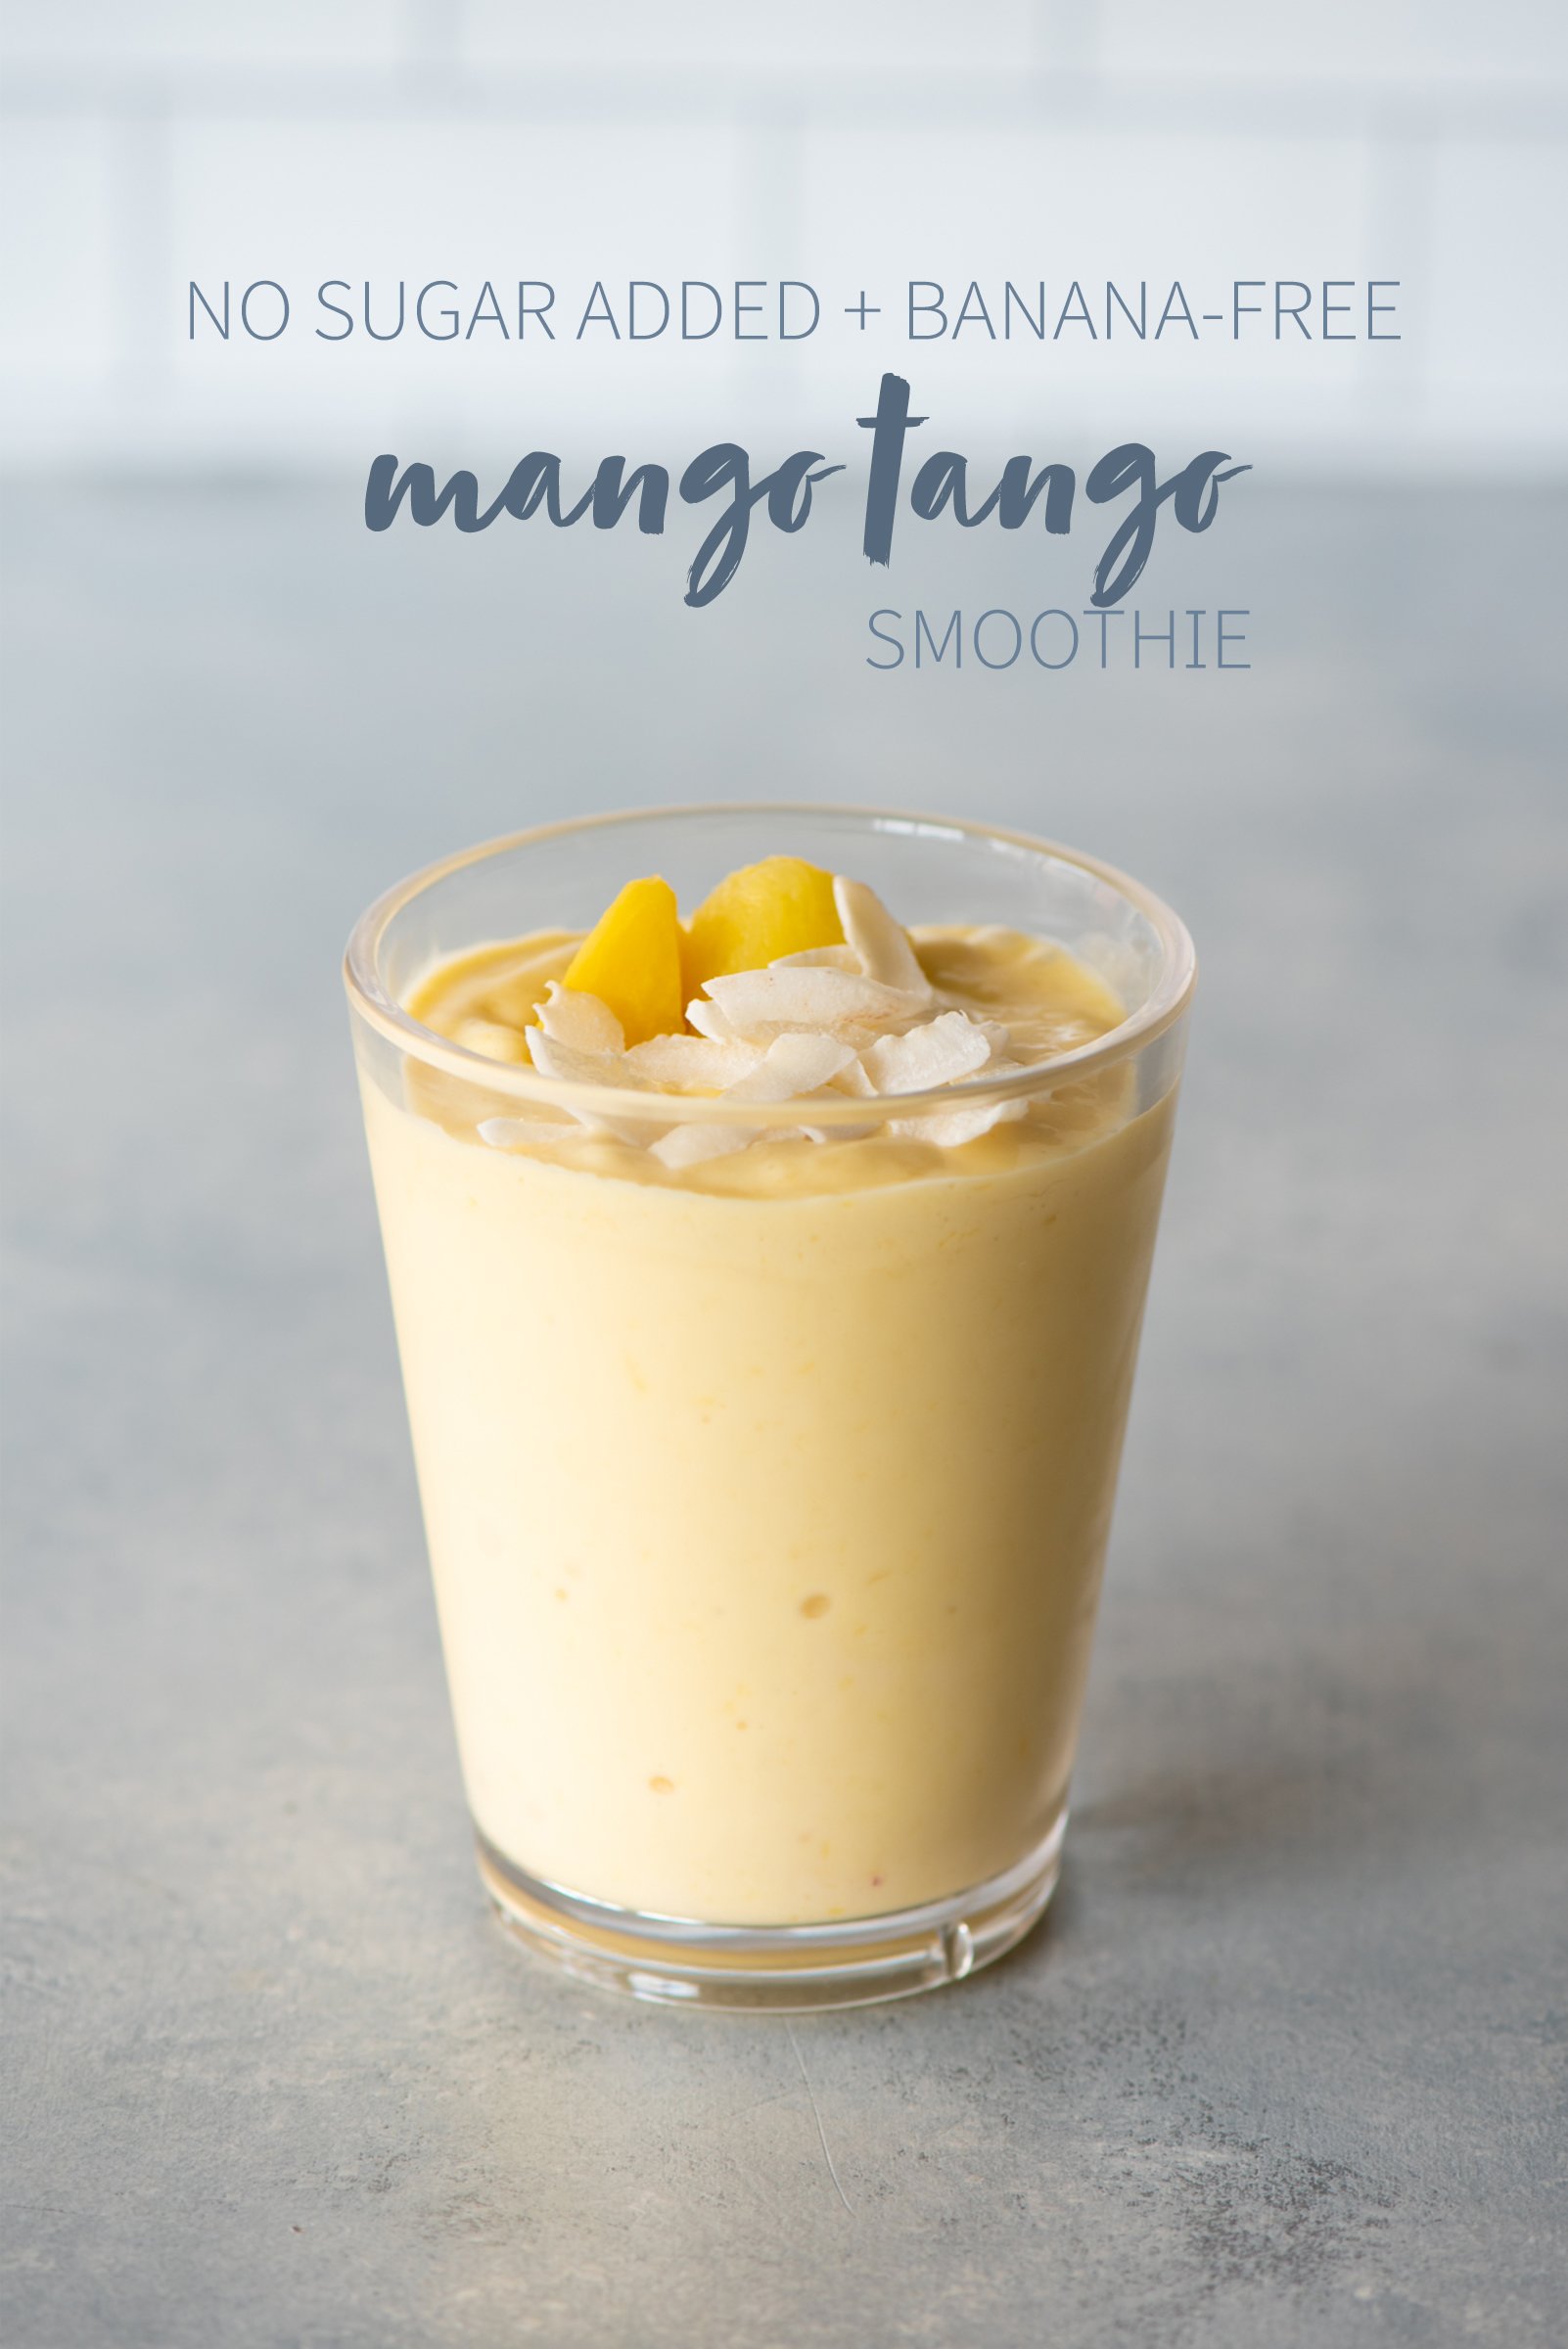 Mango Tango smoothie in a clear glass topped with mango and coconut. A text overlay reads "No Sugar Added + Banana-Free Mango Tango Smoothie."